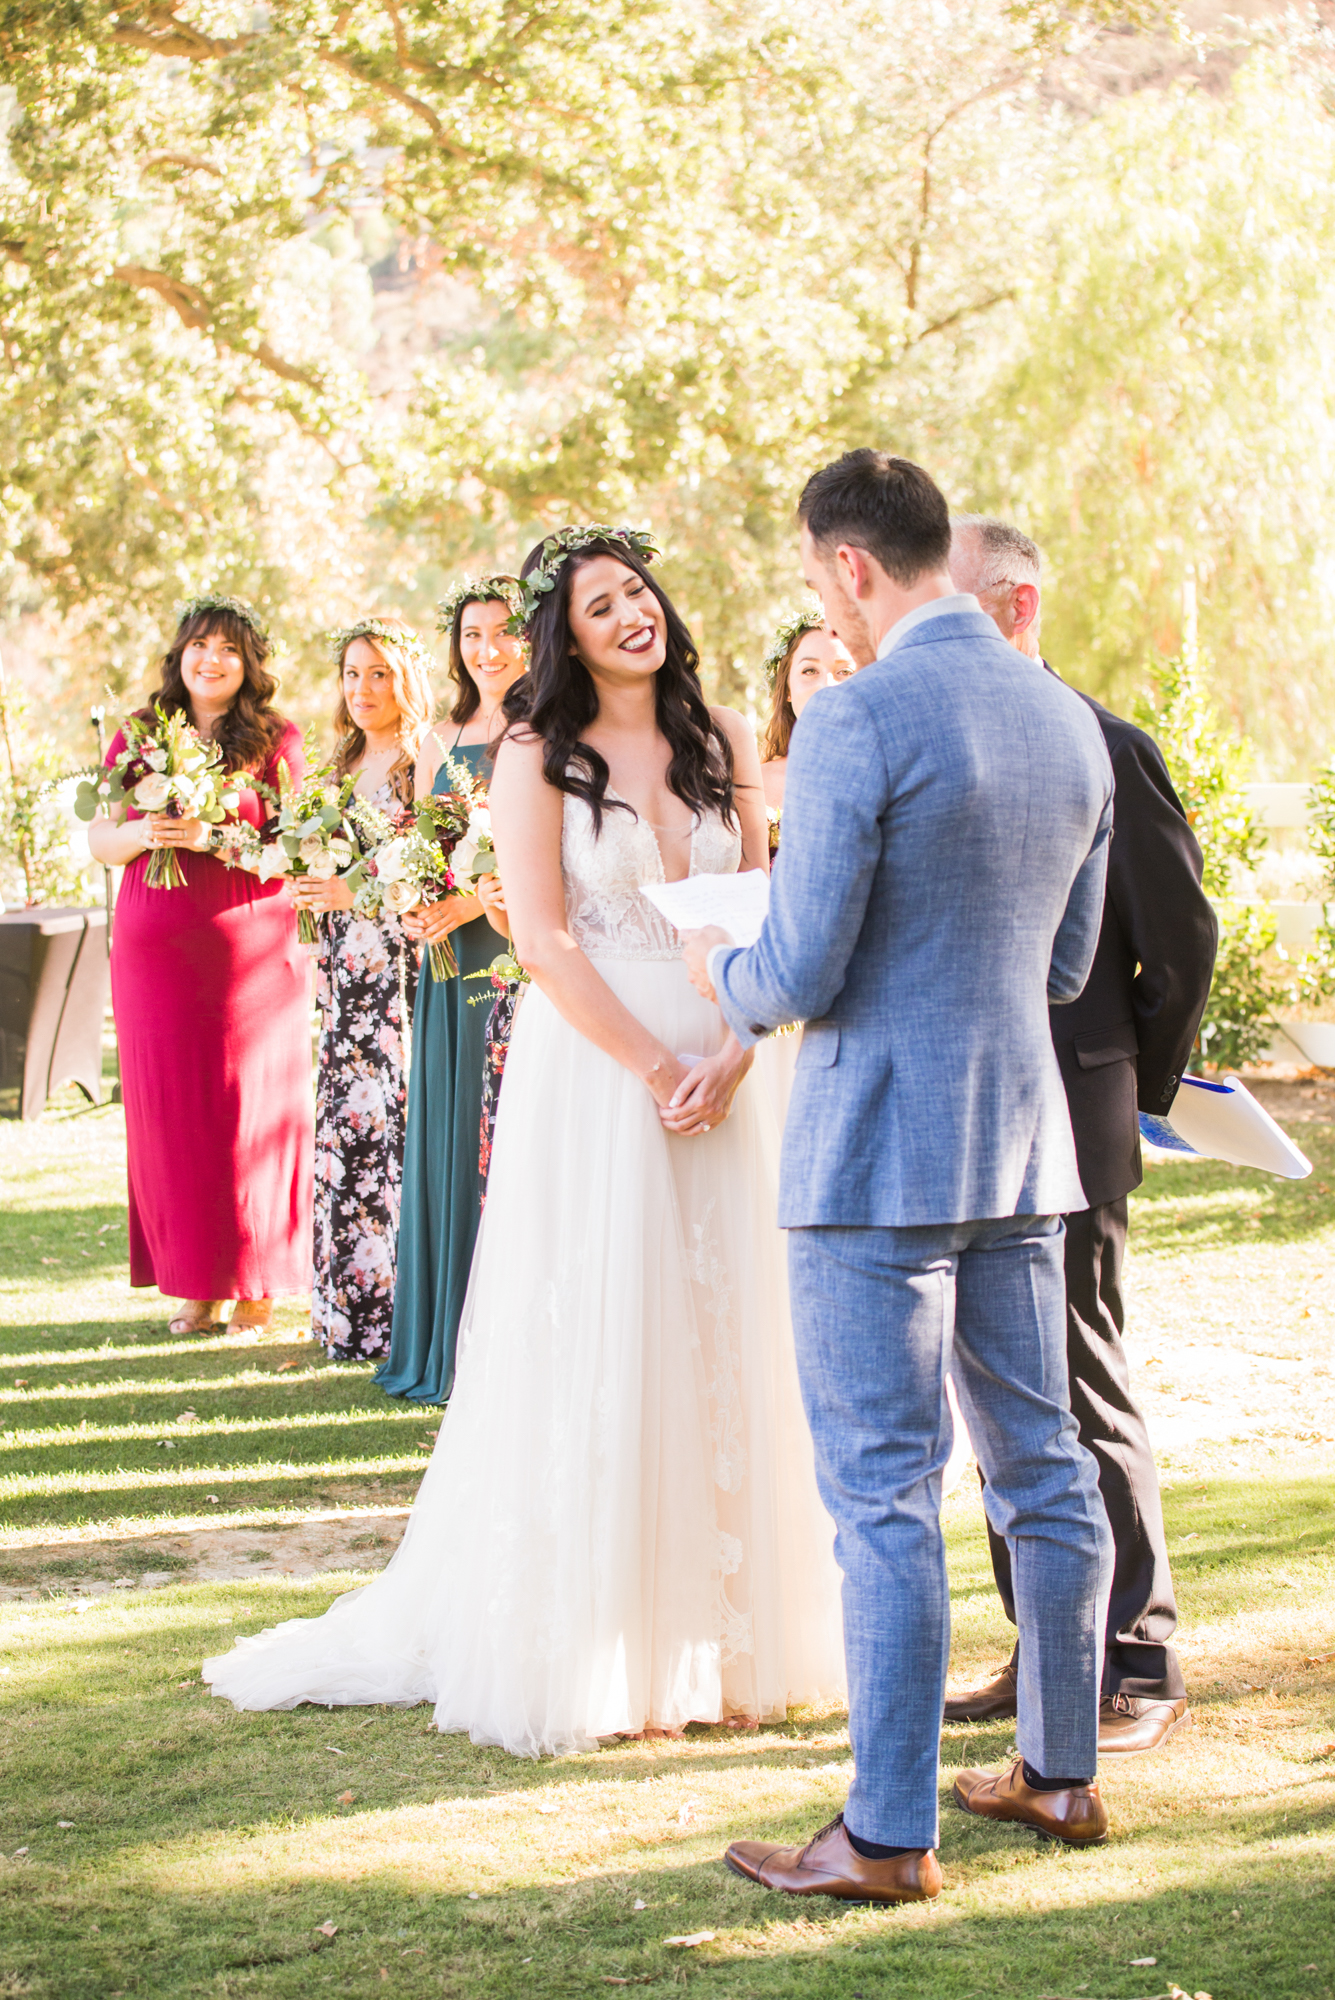 Brides reaction to groom's vows during fall wedding 